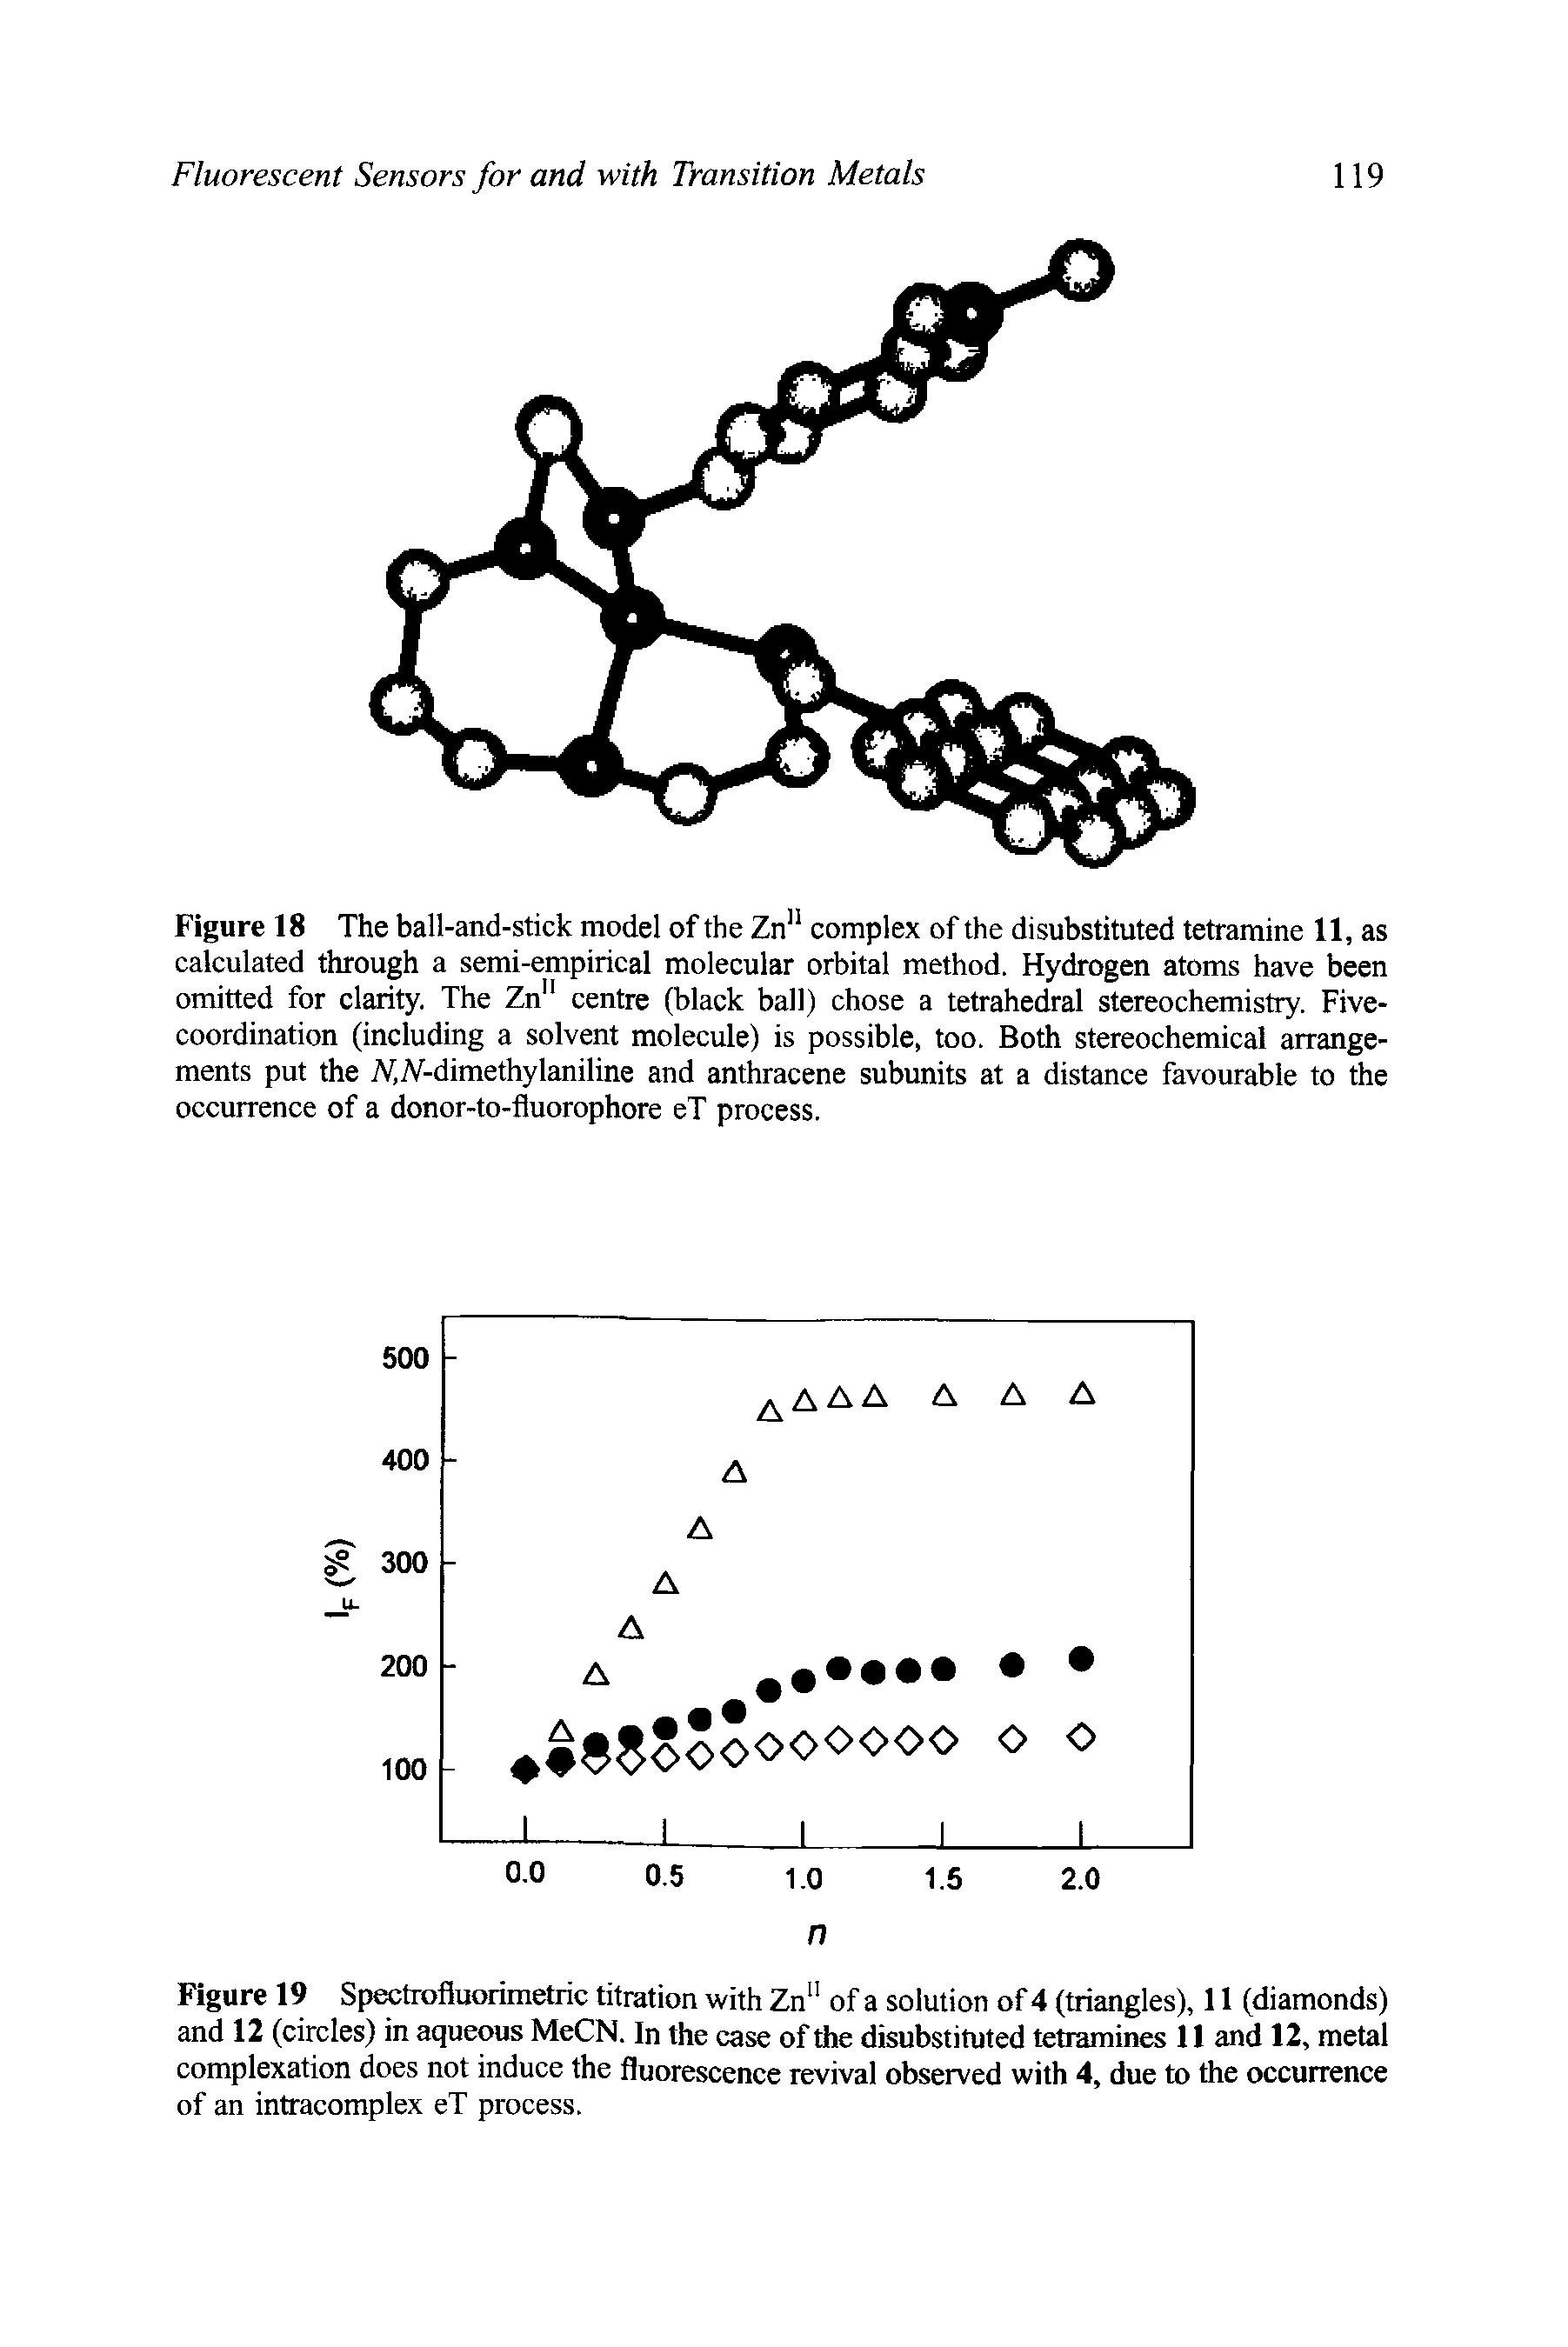 Figure 18 The ball-and-stick model of the Zn" complex of the disubstituted tetramine 11, as calculated through a semi-empirical molecular orbital method. Hydrogen atoms have been omitted for clarity. The Zn" centre (black ball) chose a tetrahedral stereochemistry. Five-coordination (including a solvent molecule) is possible, too. Both stereochemical arrangements put the A/ A -dimethylaniline and anthracene subunits at a distance favourable to the occurrence of a donor-to-fluorophore eT process.